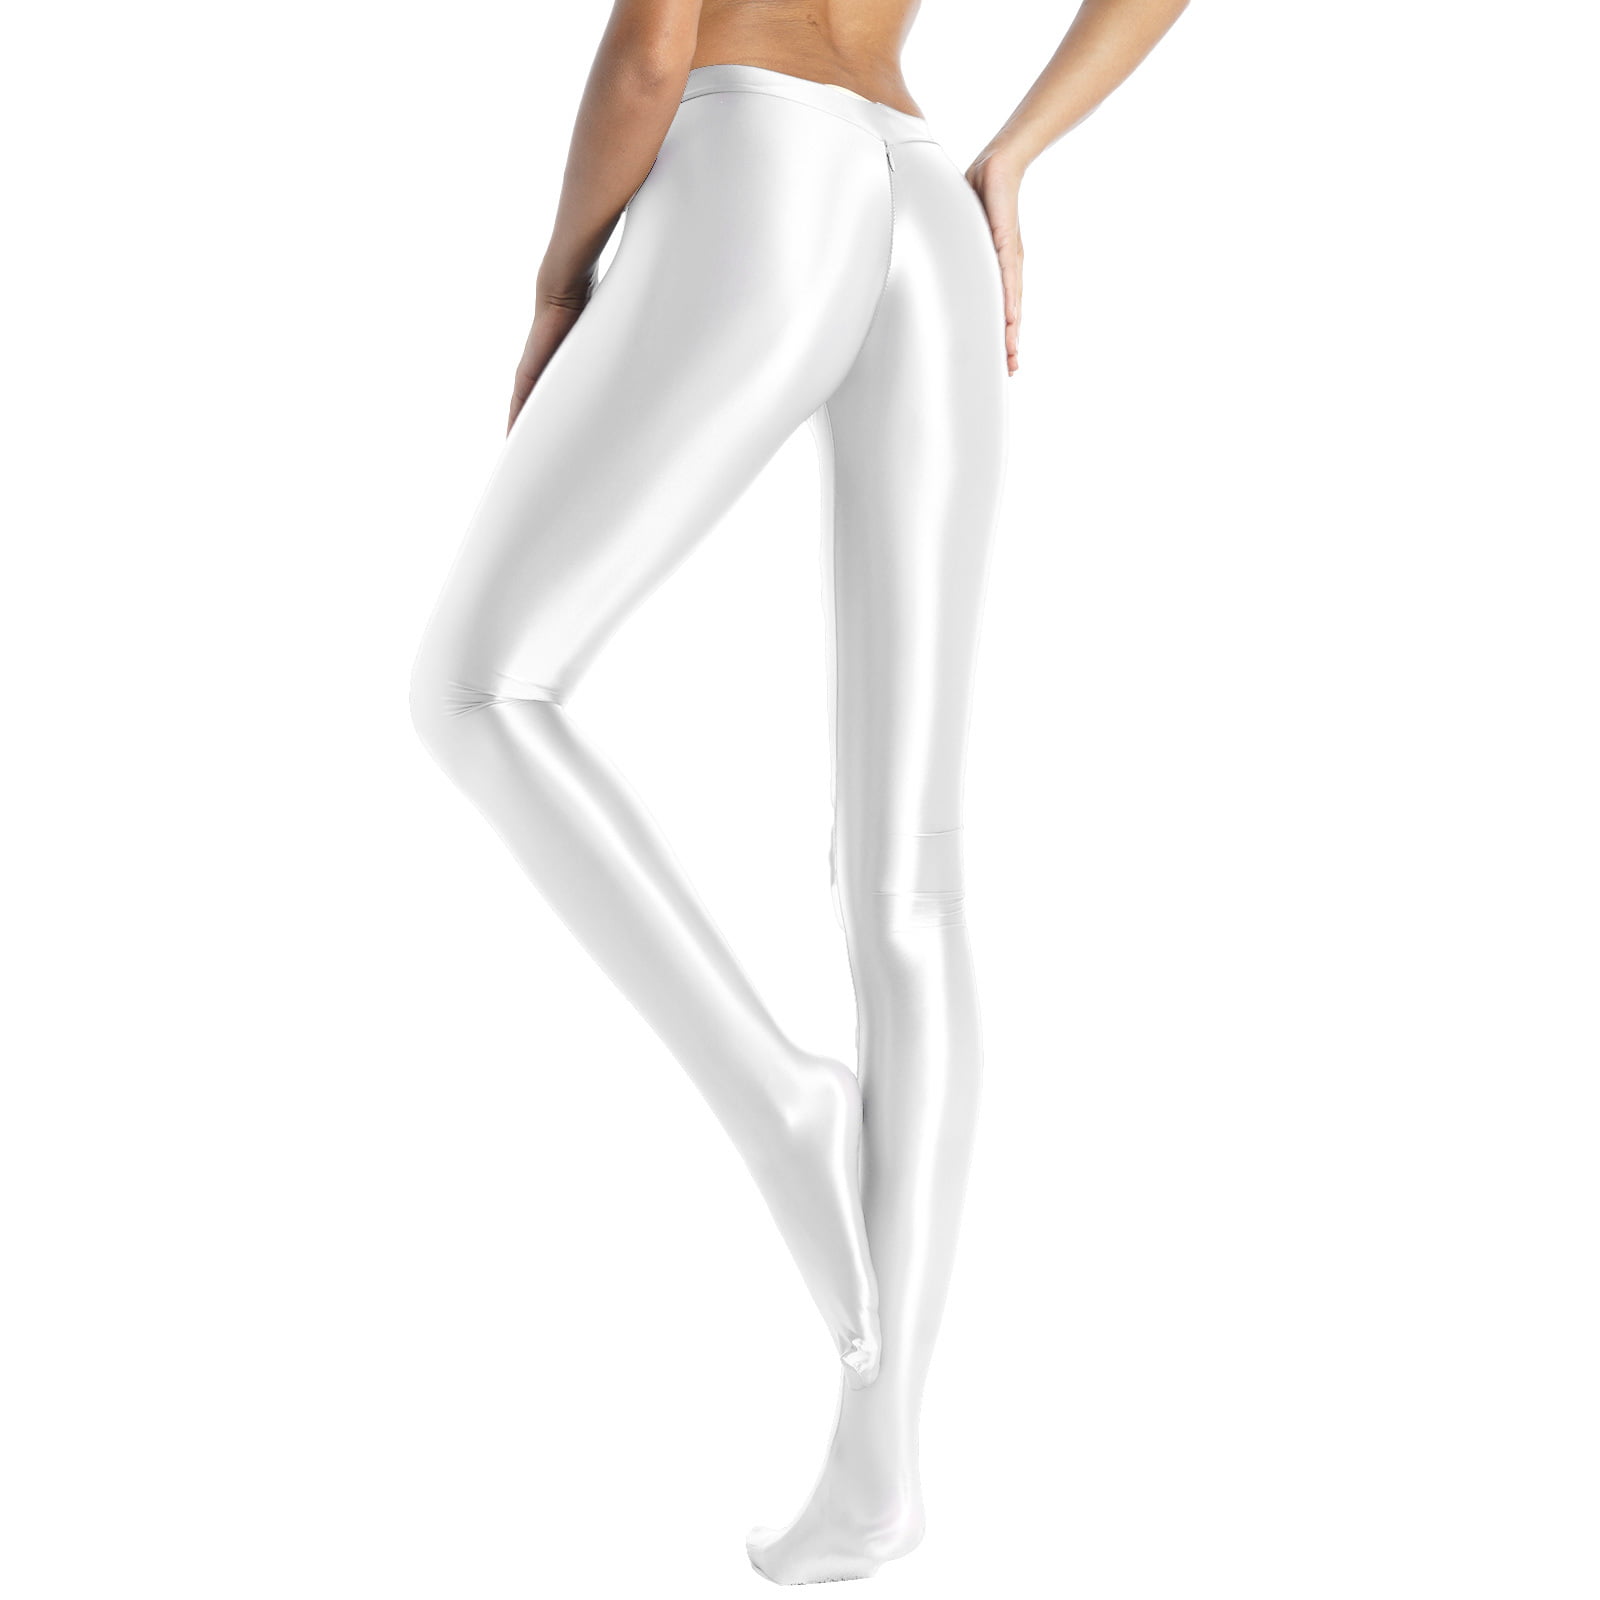 shiny white leggings, as you may have noticed, I am a big f…